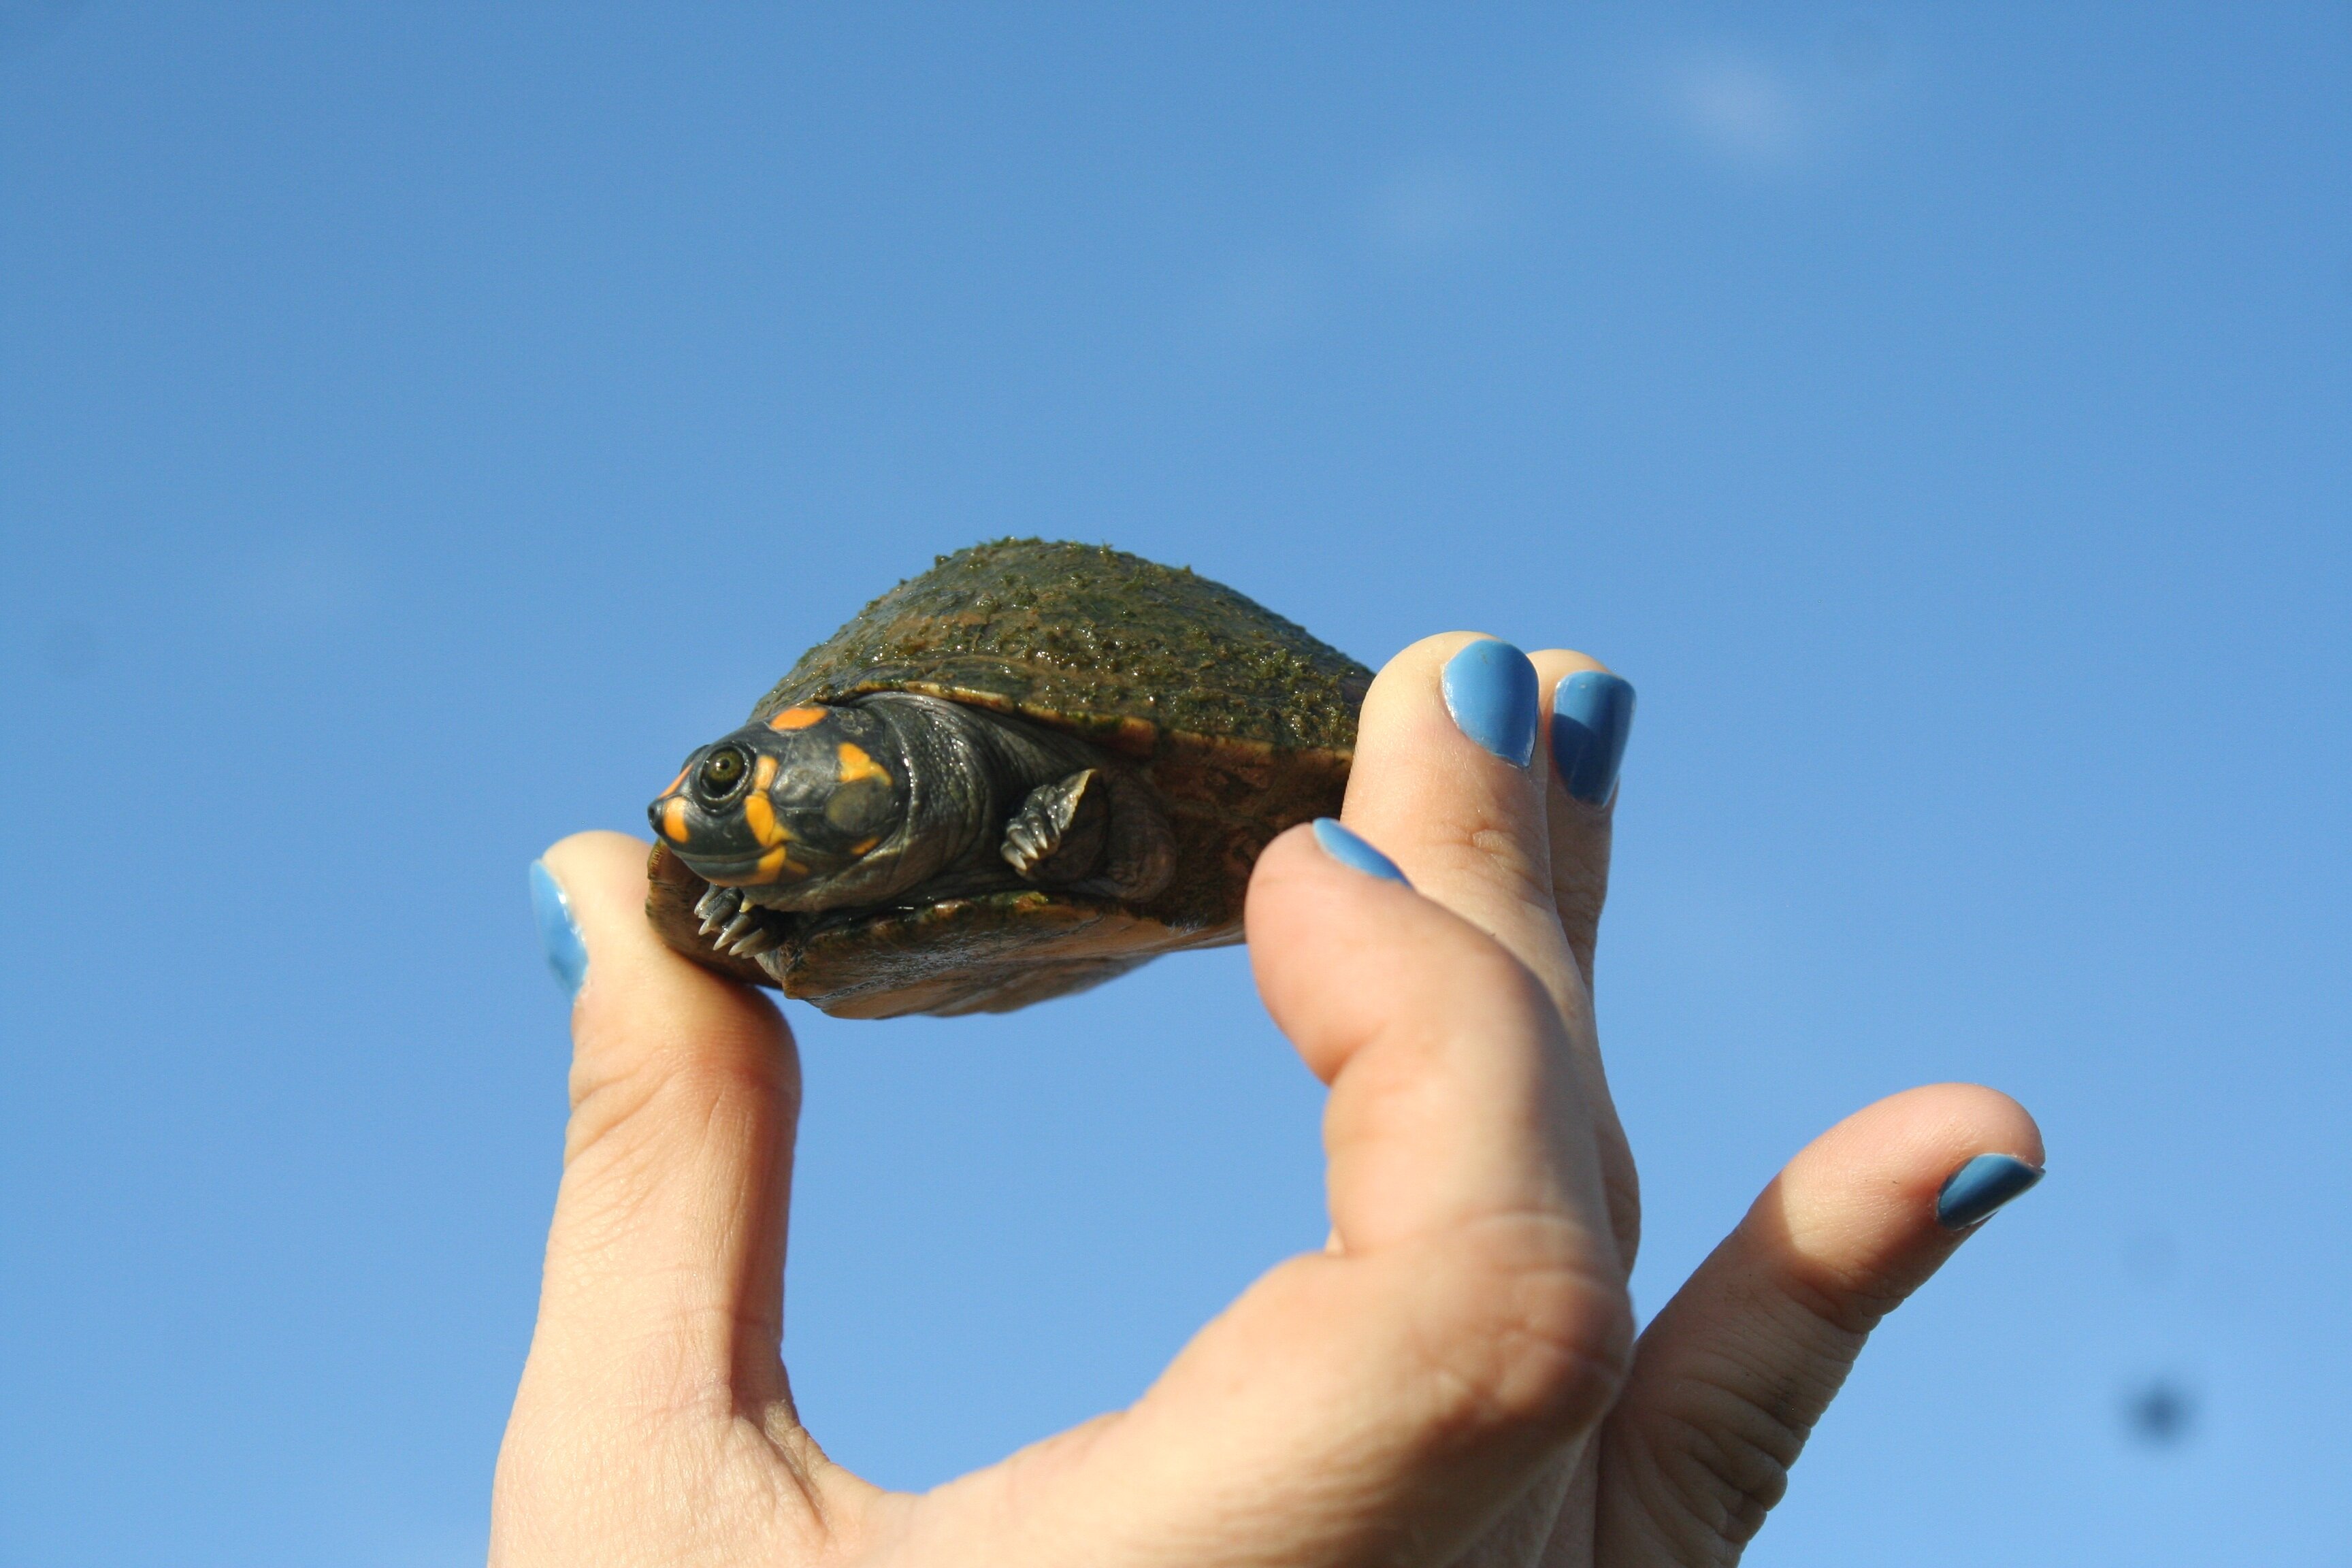 Learn about turtles from around the world!